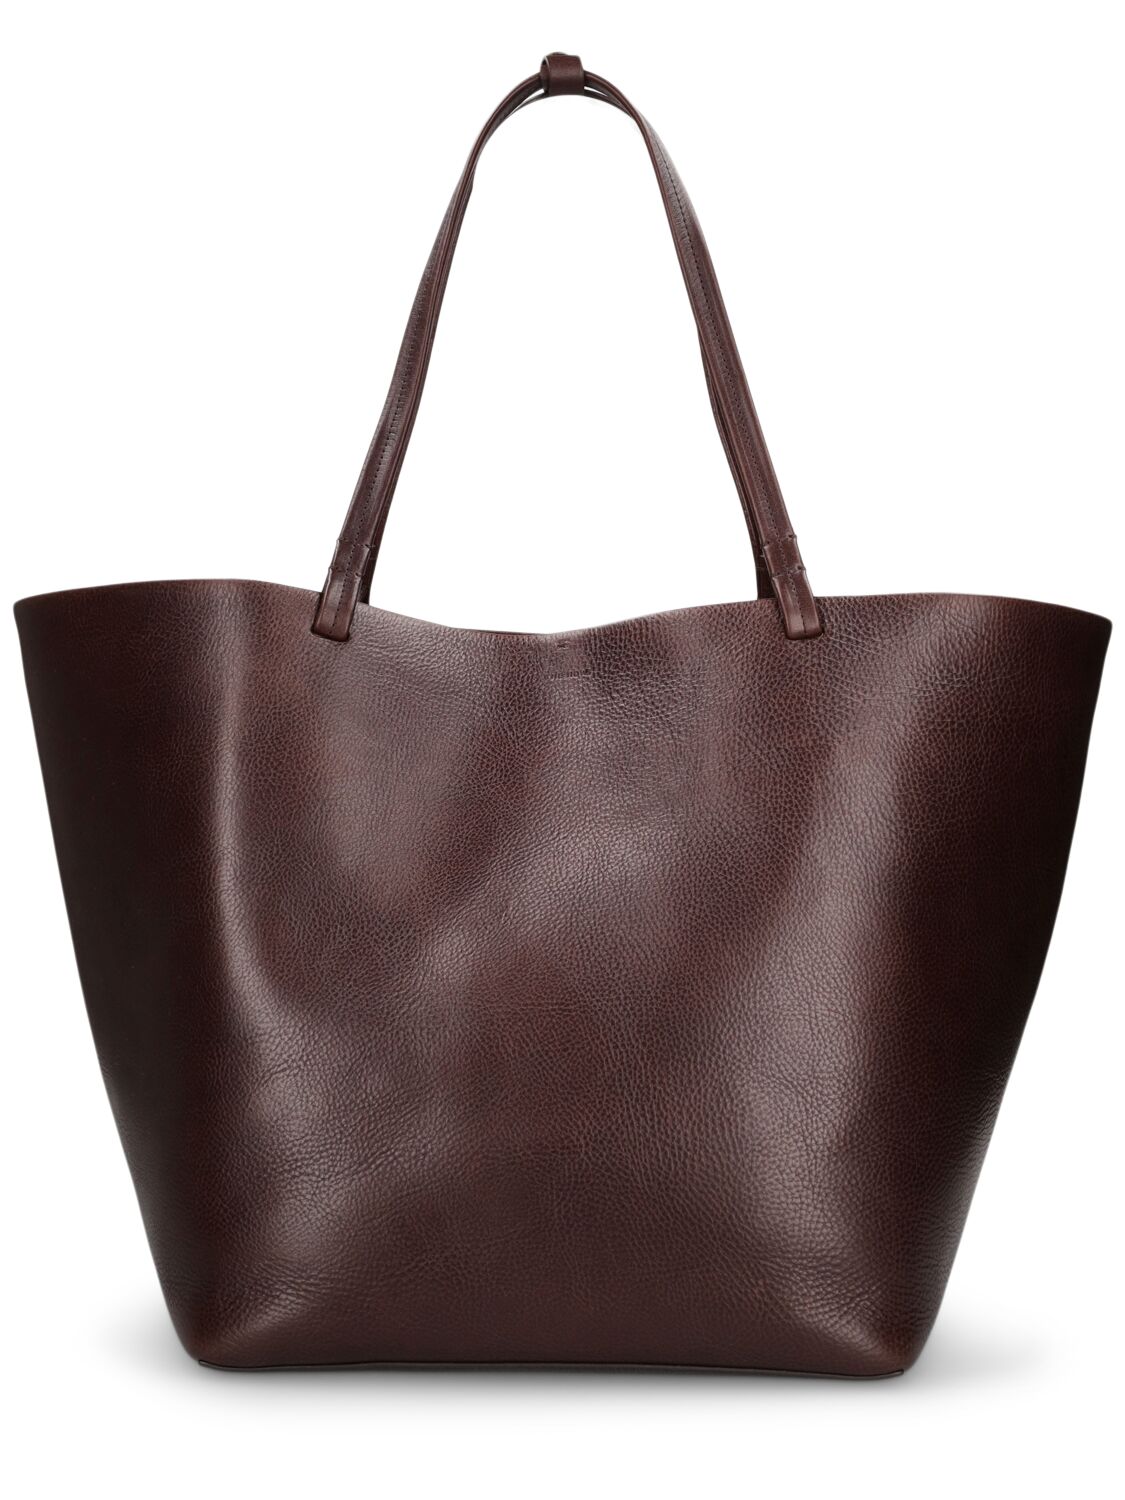 Image of Xl Park Leather Tote